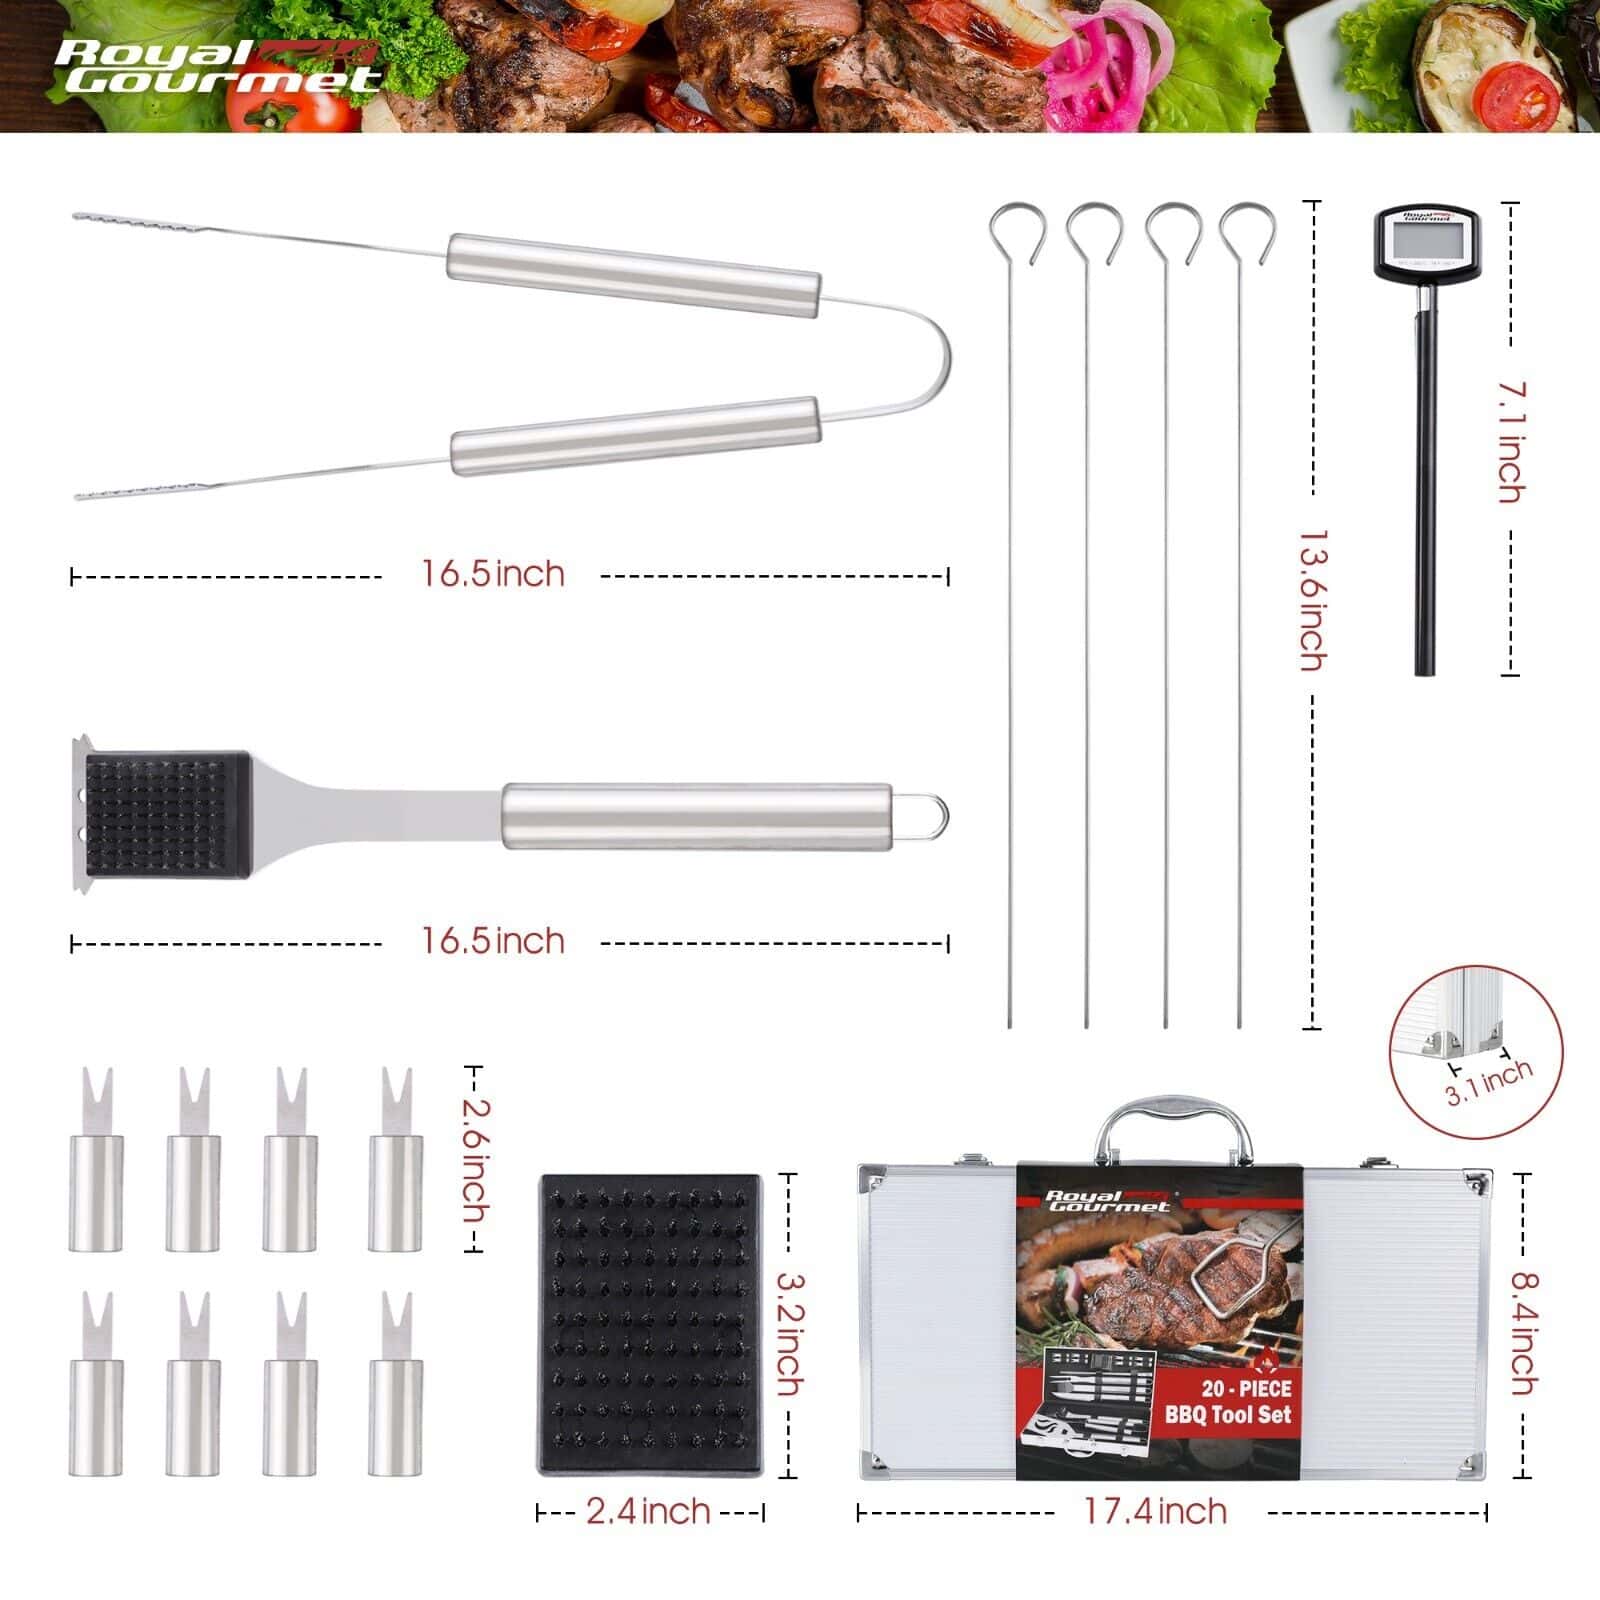 A set of barbecue tools with measurements and instructions.